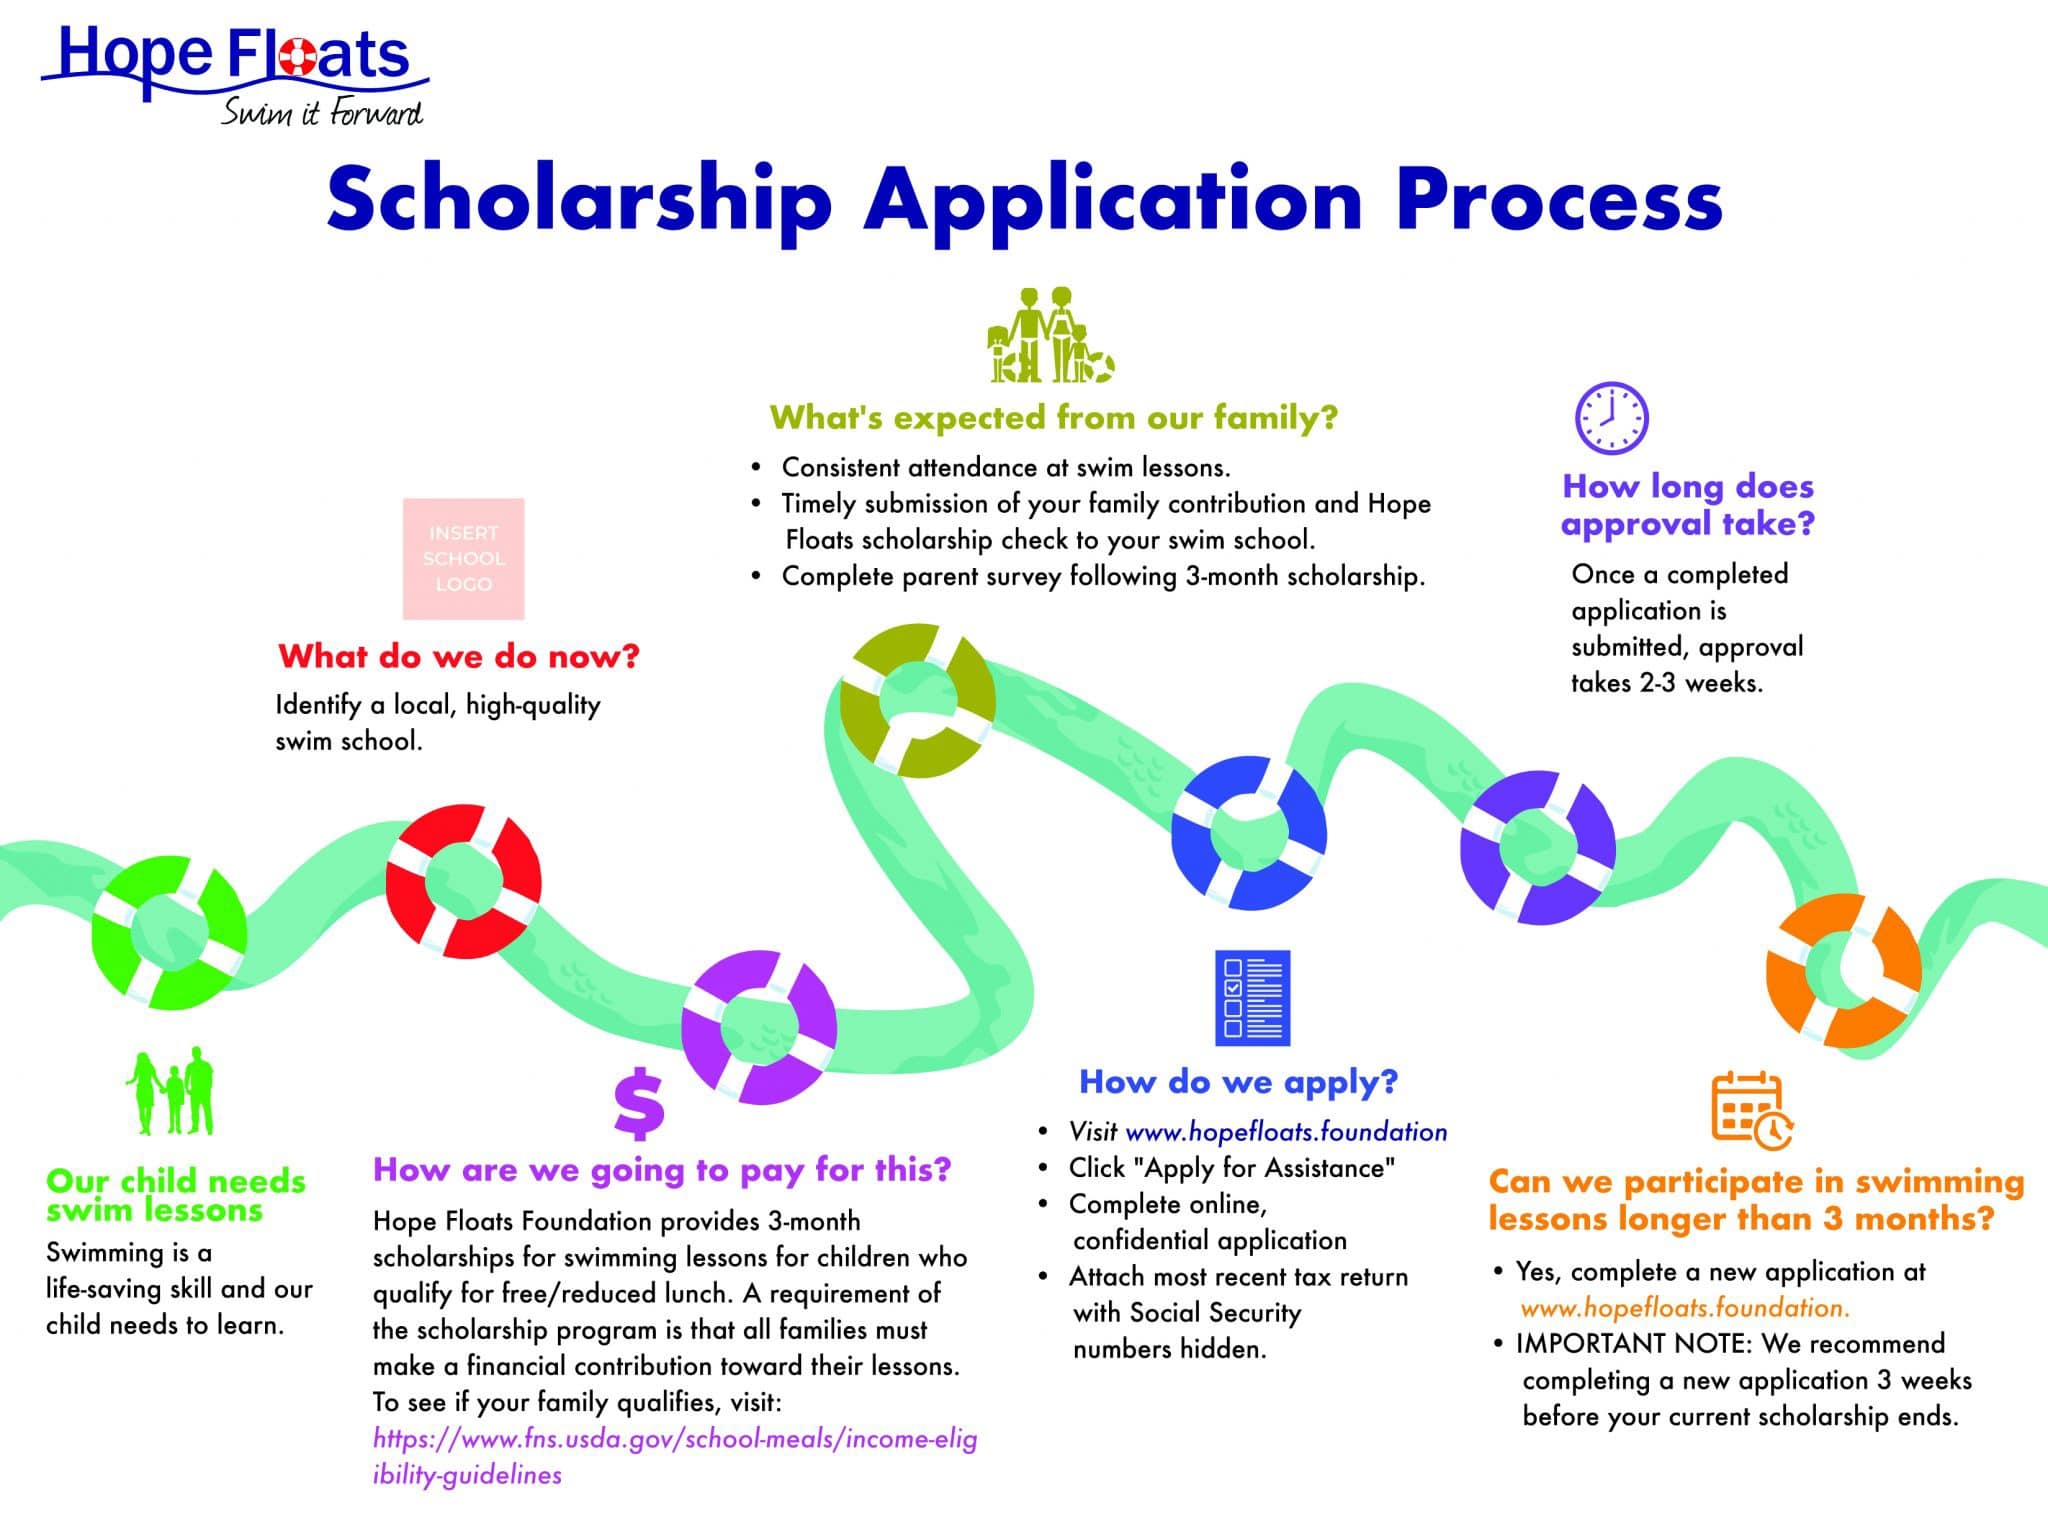 Hope Floats Scholarship Application Process Infographic